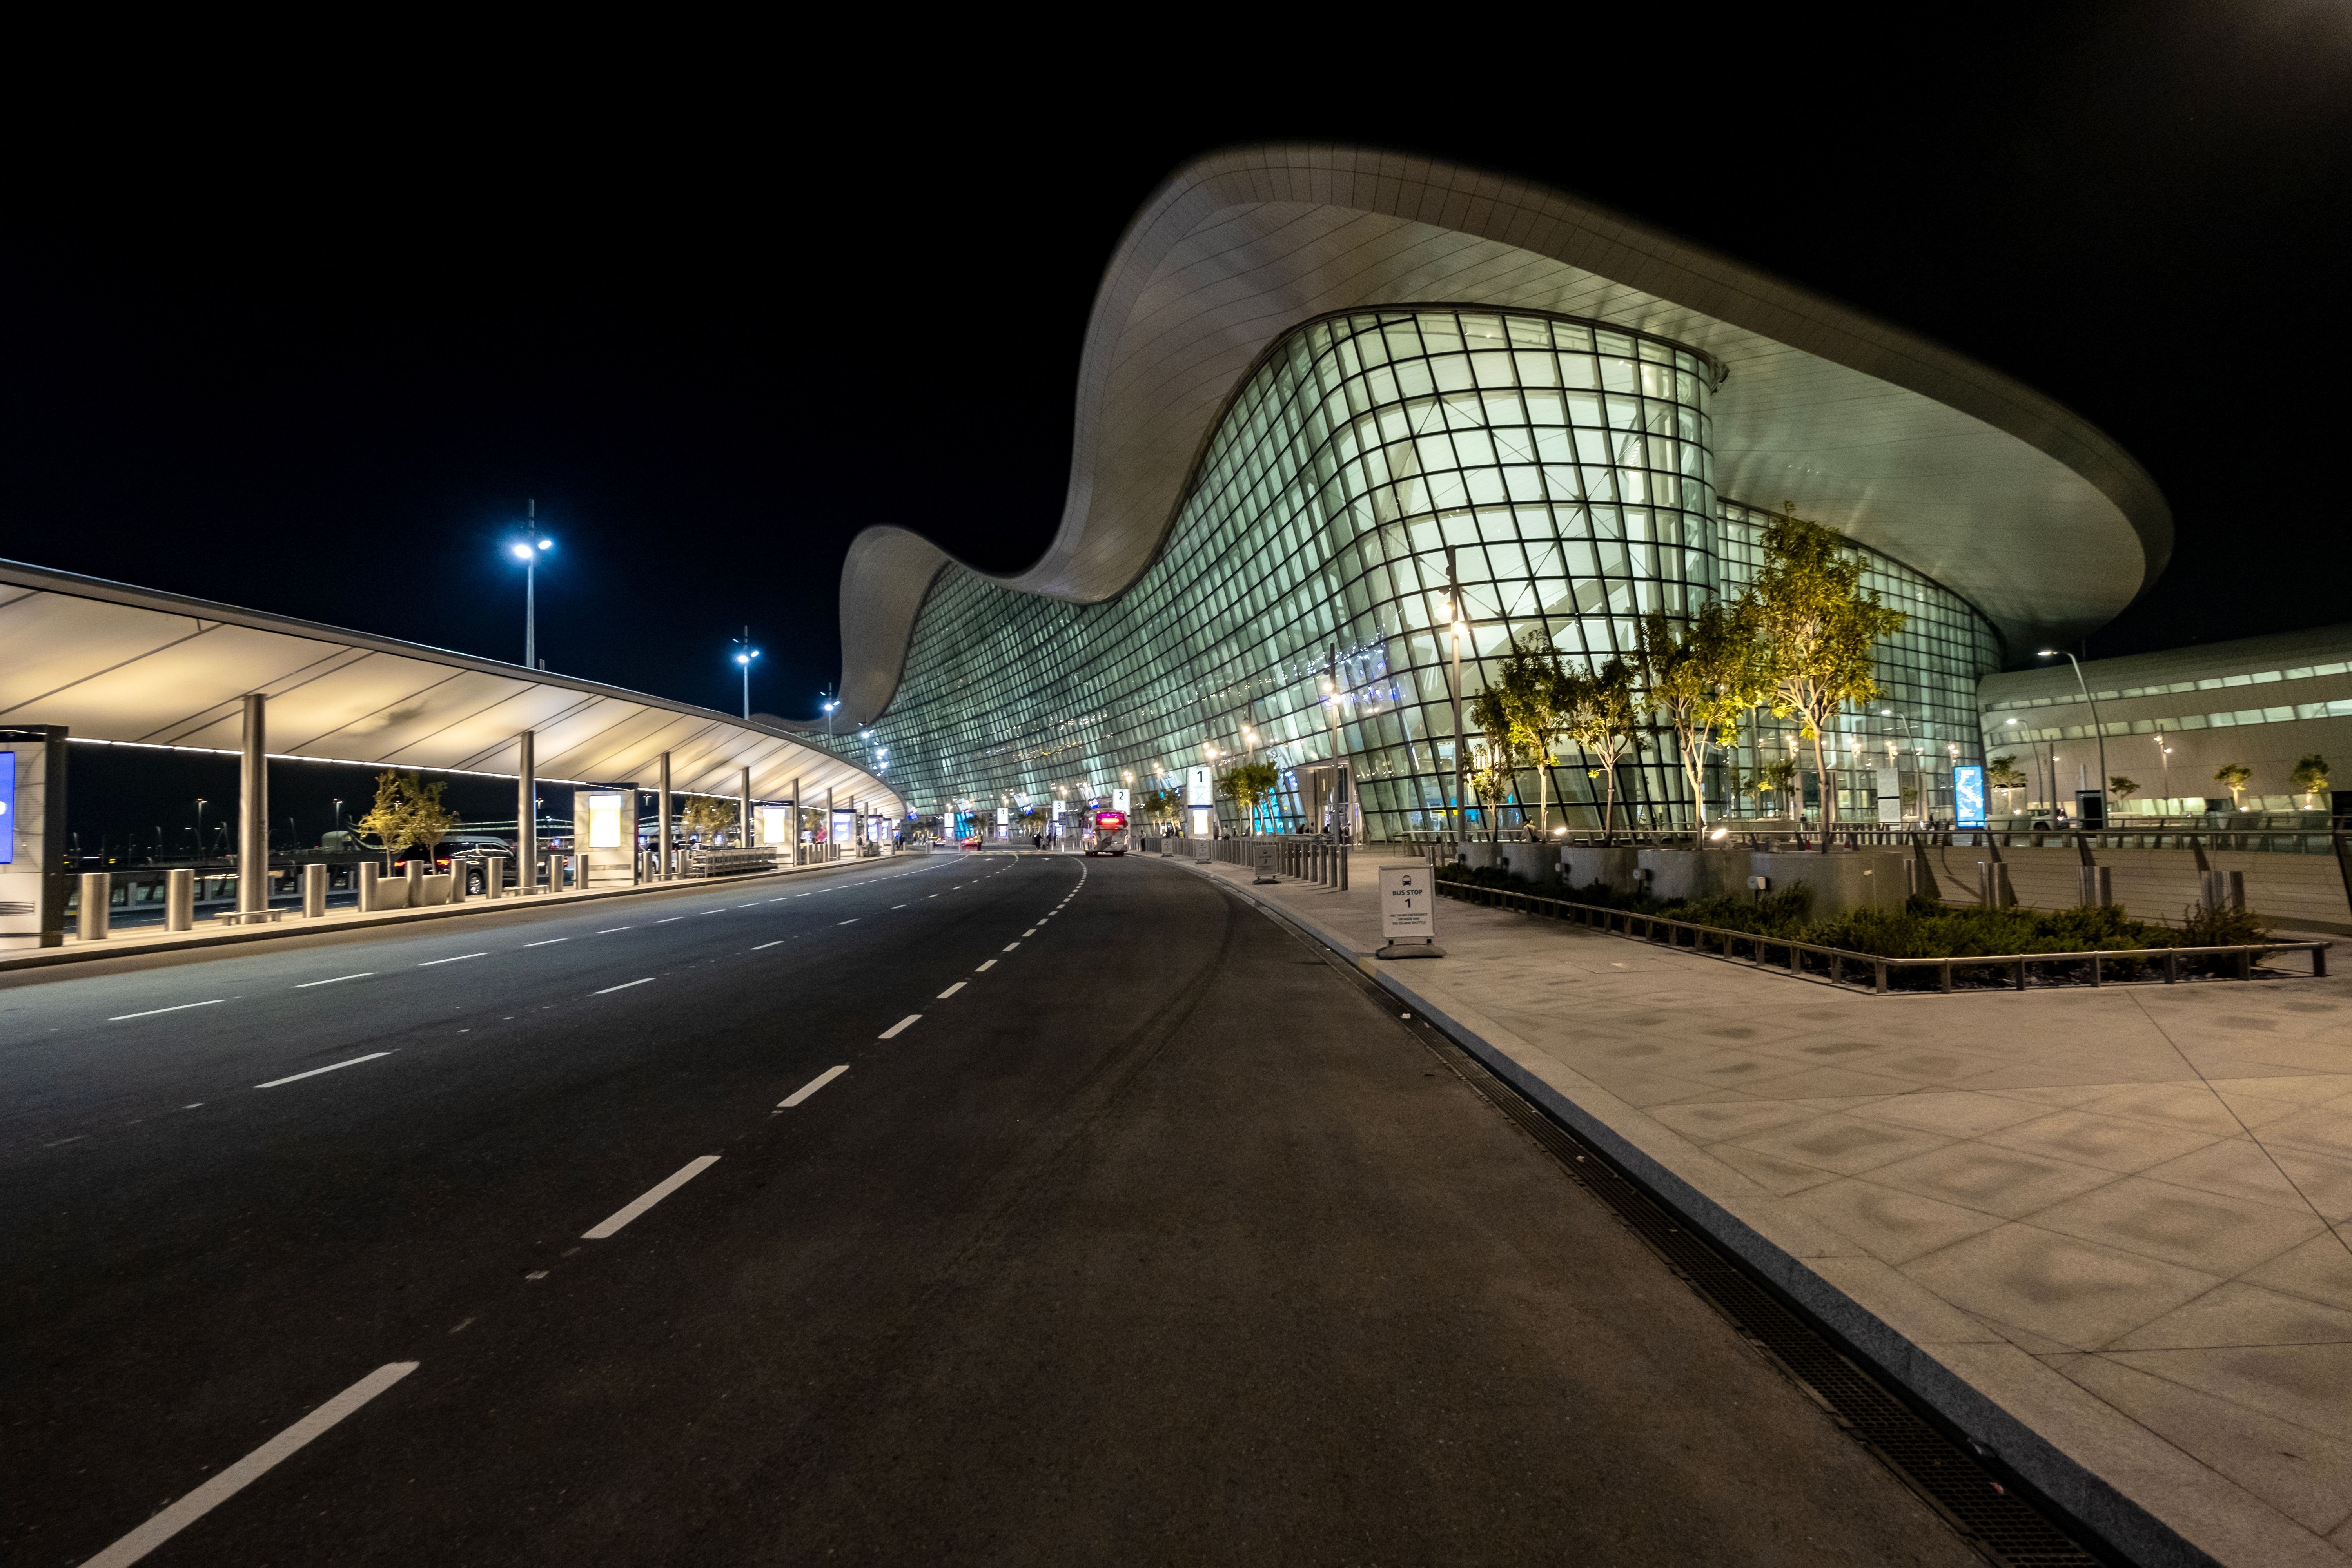 The exterior of the new airport at Abu Dhabi taken in a night view.